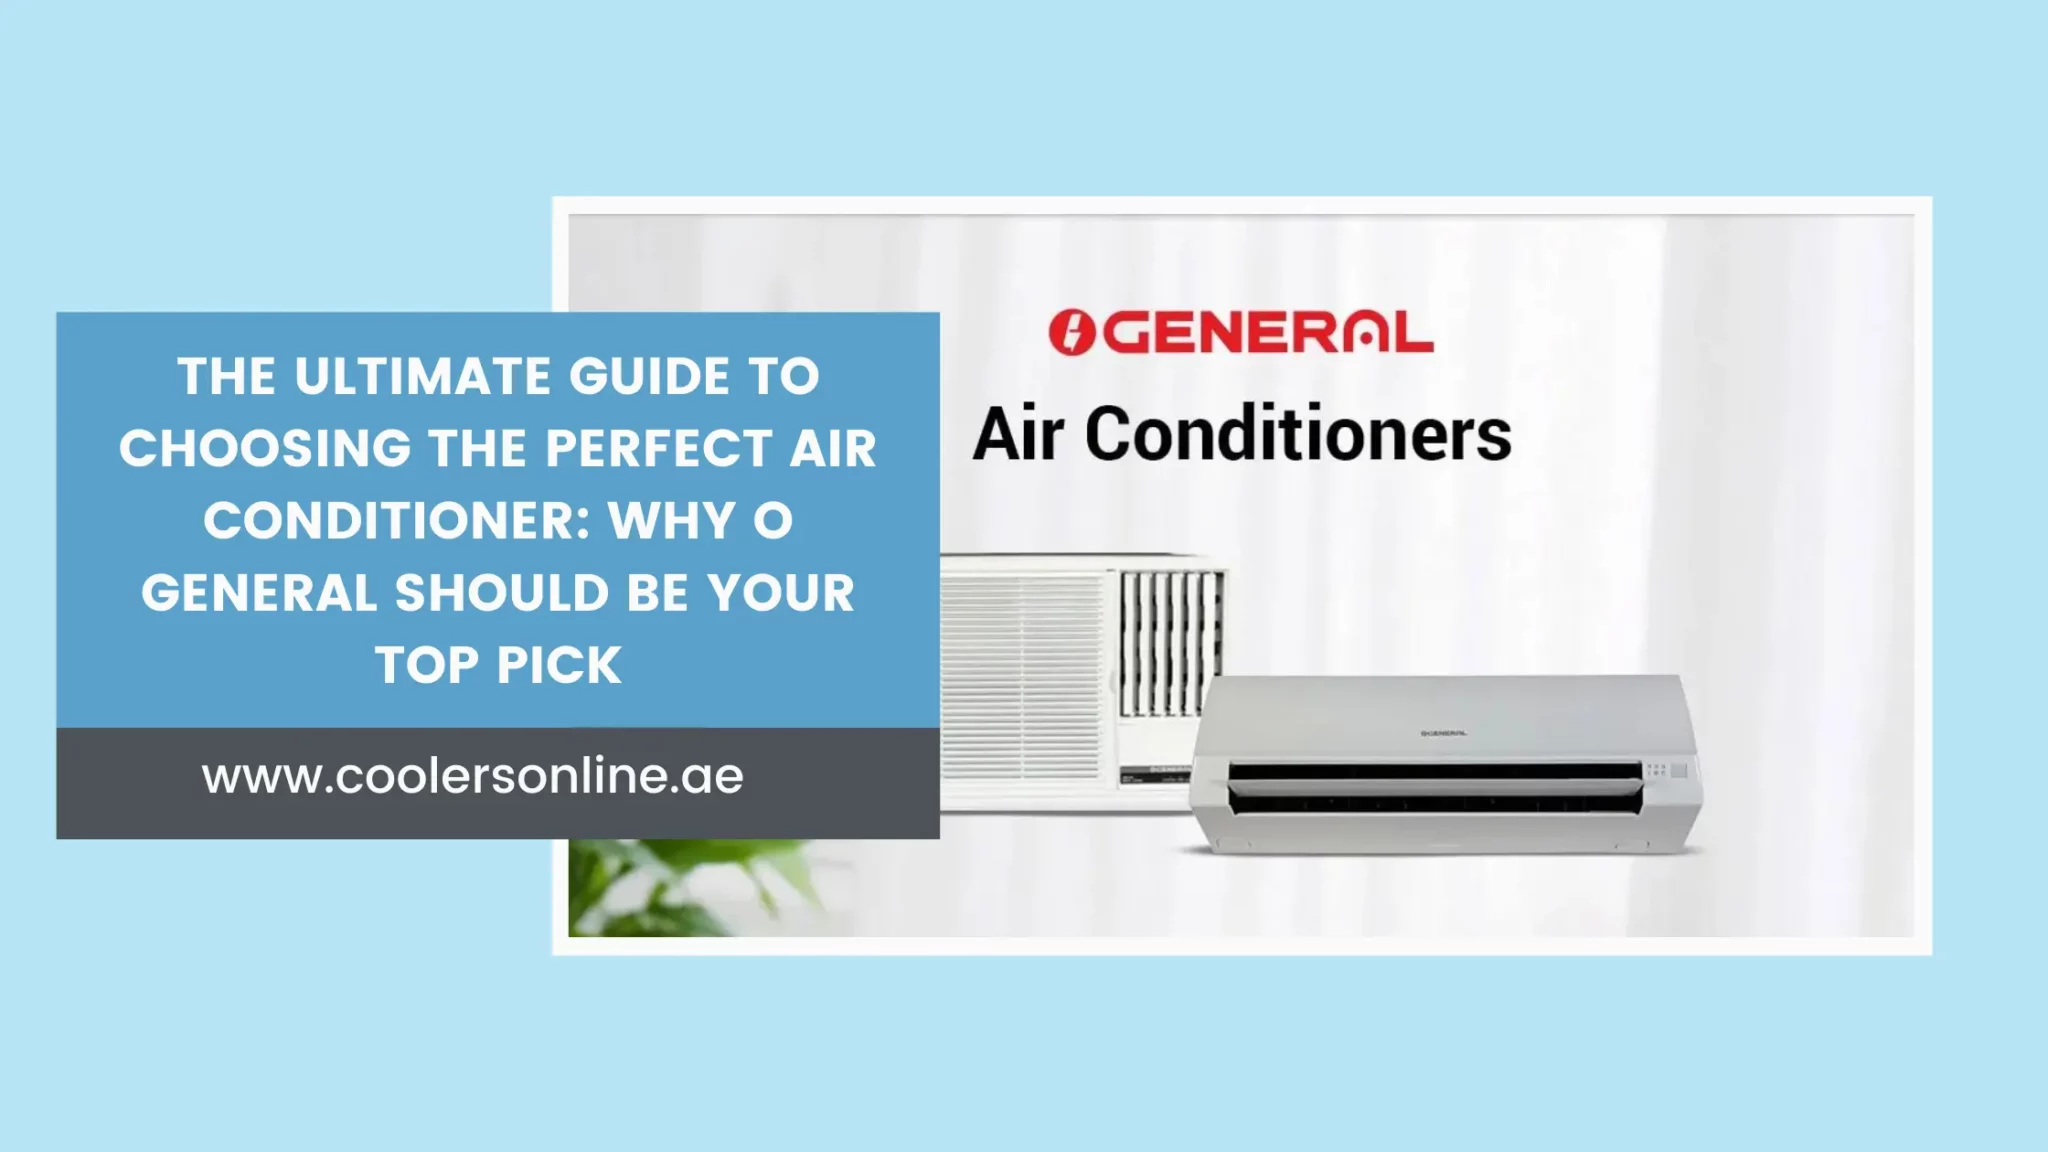 The Ultimate Guide to Choosing the Perfect Air Conditioner: Why O General Should Be Your Top Pick